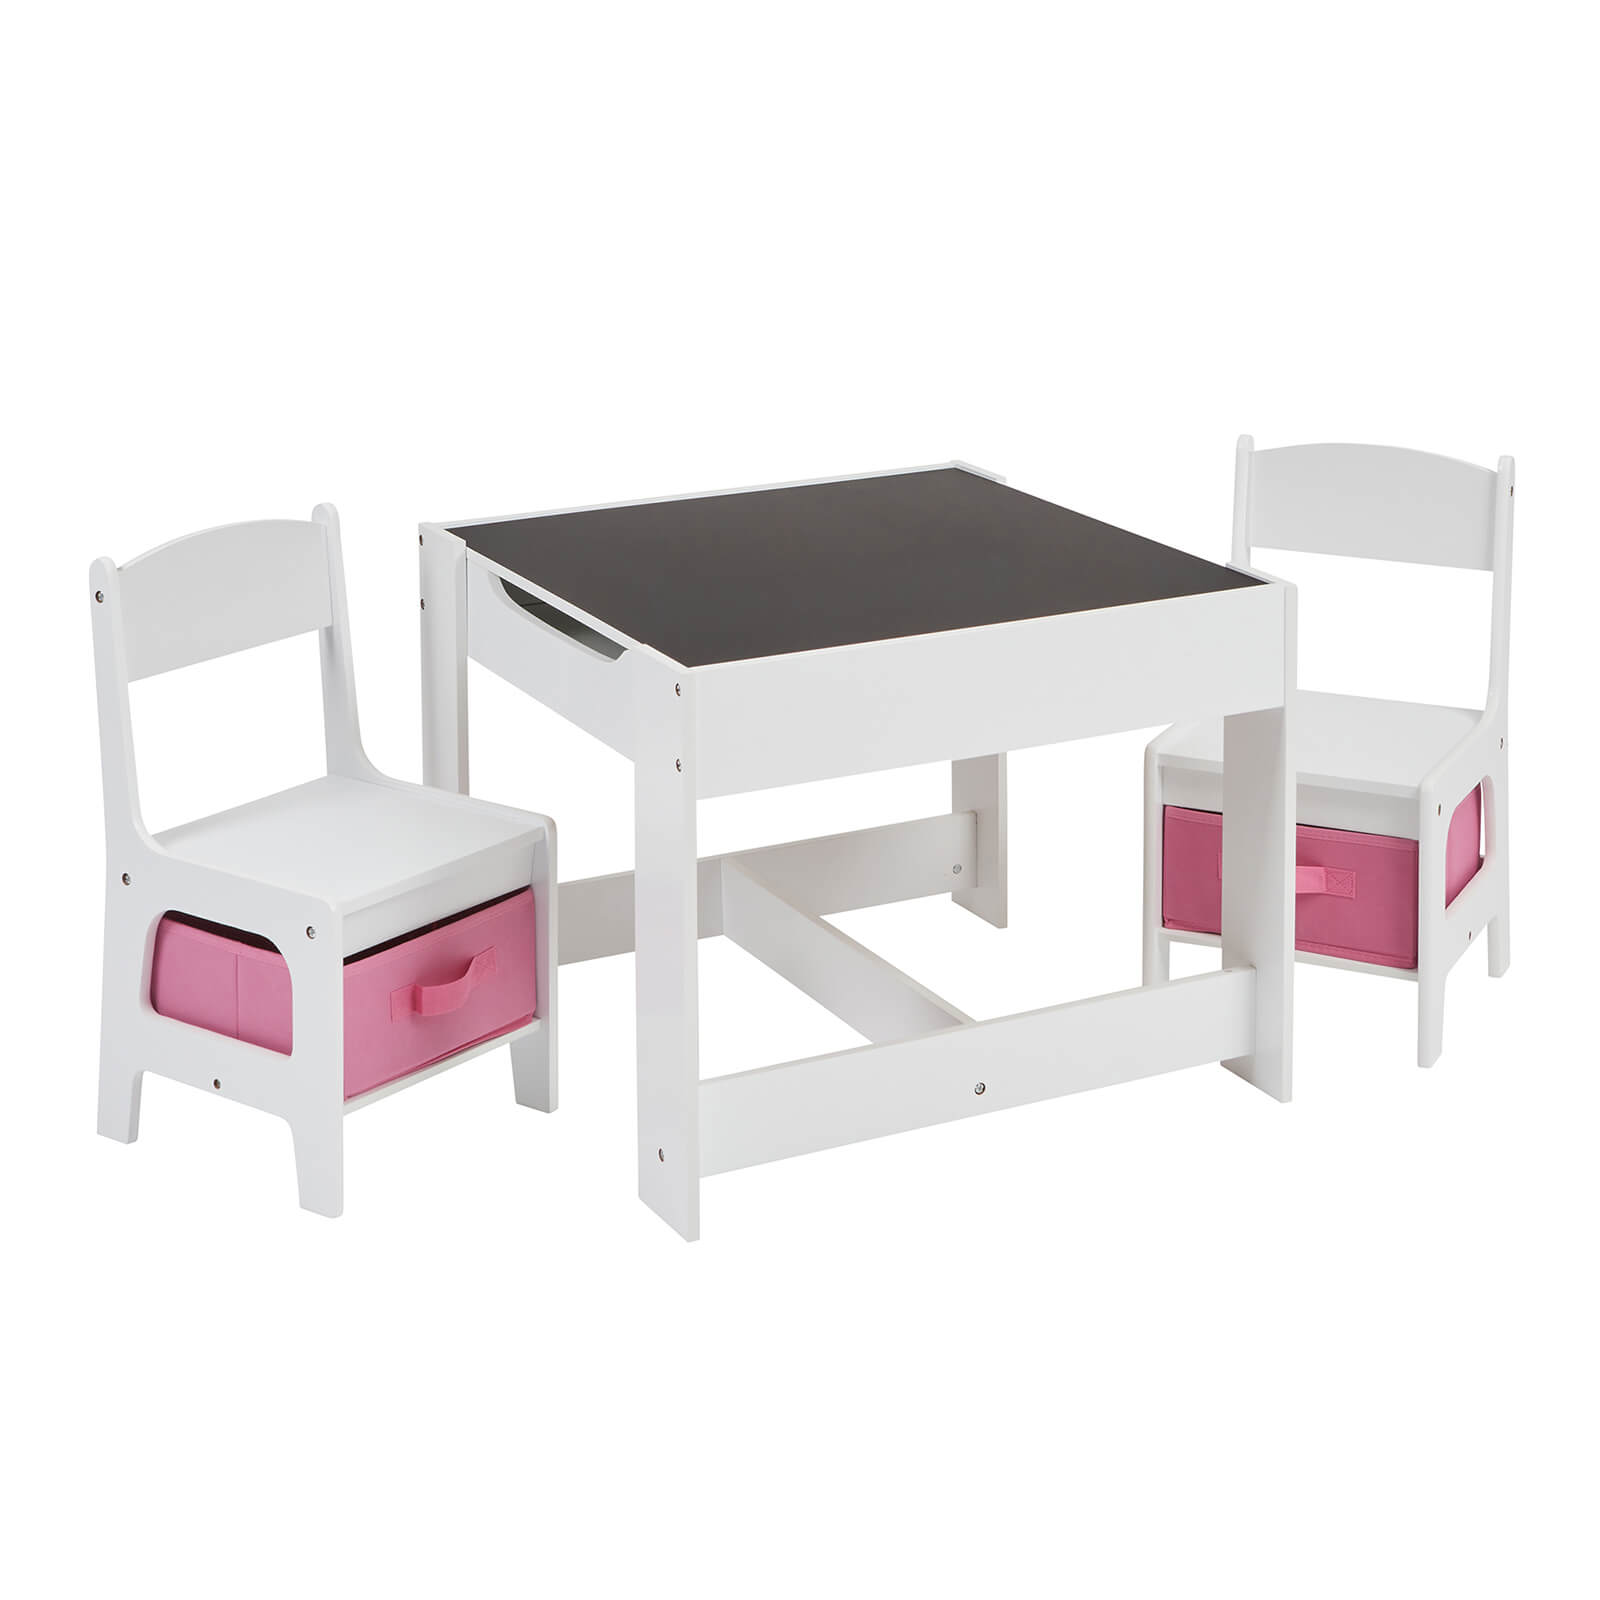 Table & Chair - White with Pink Bins